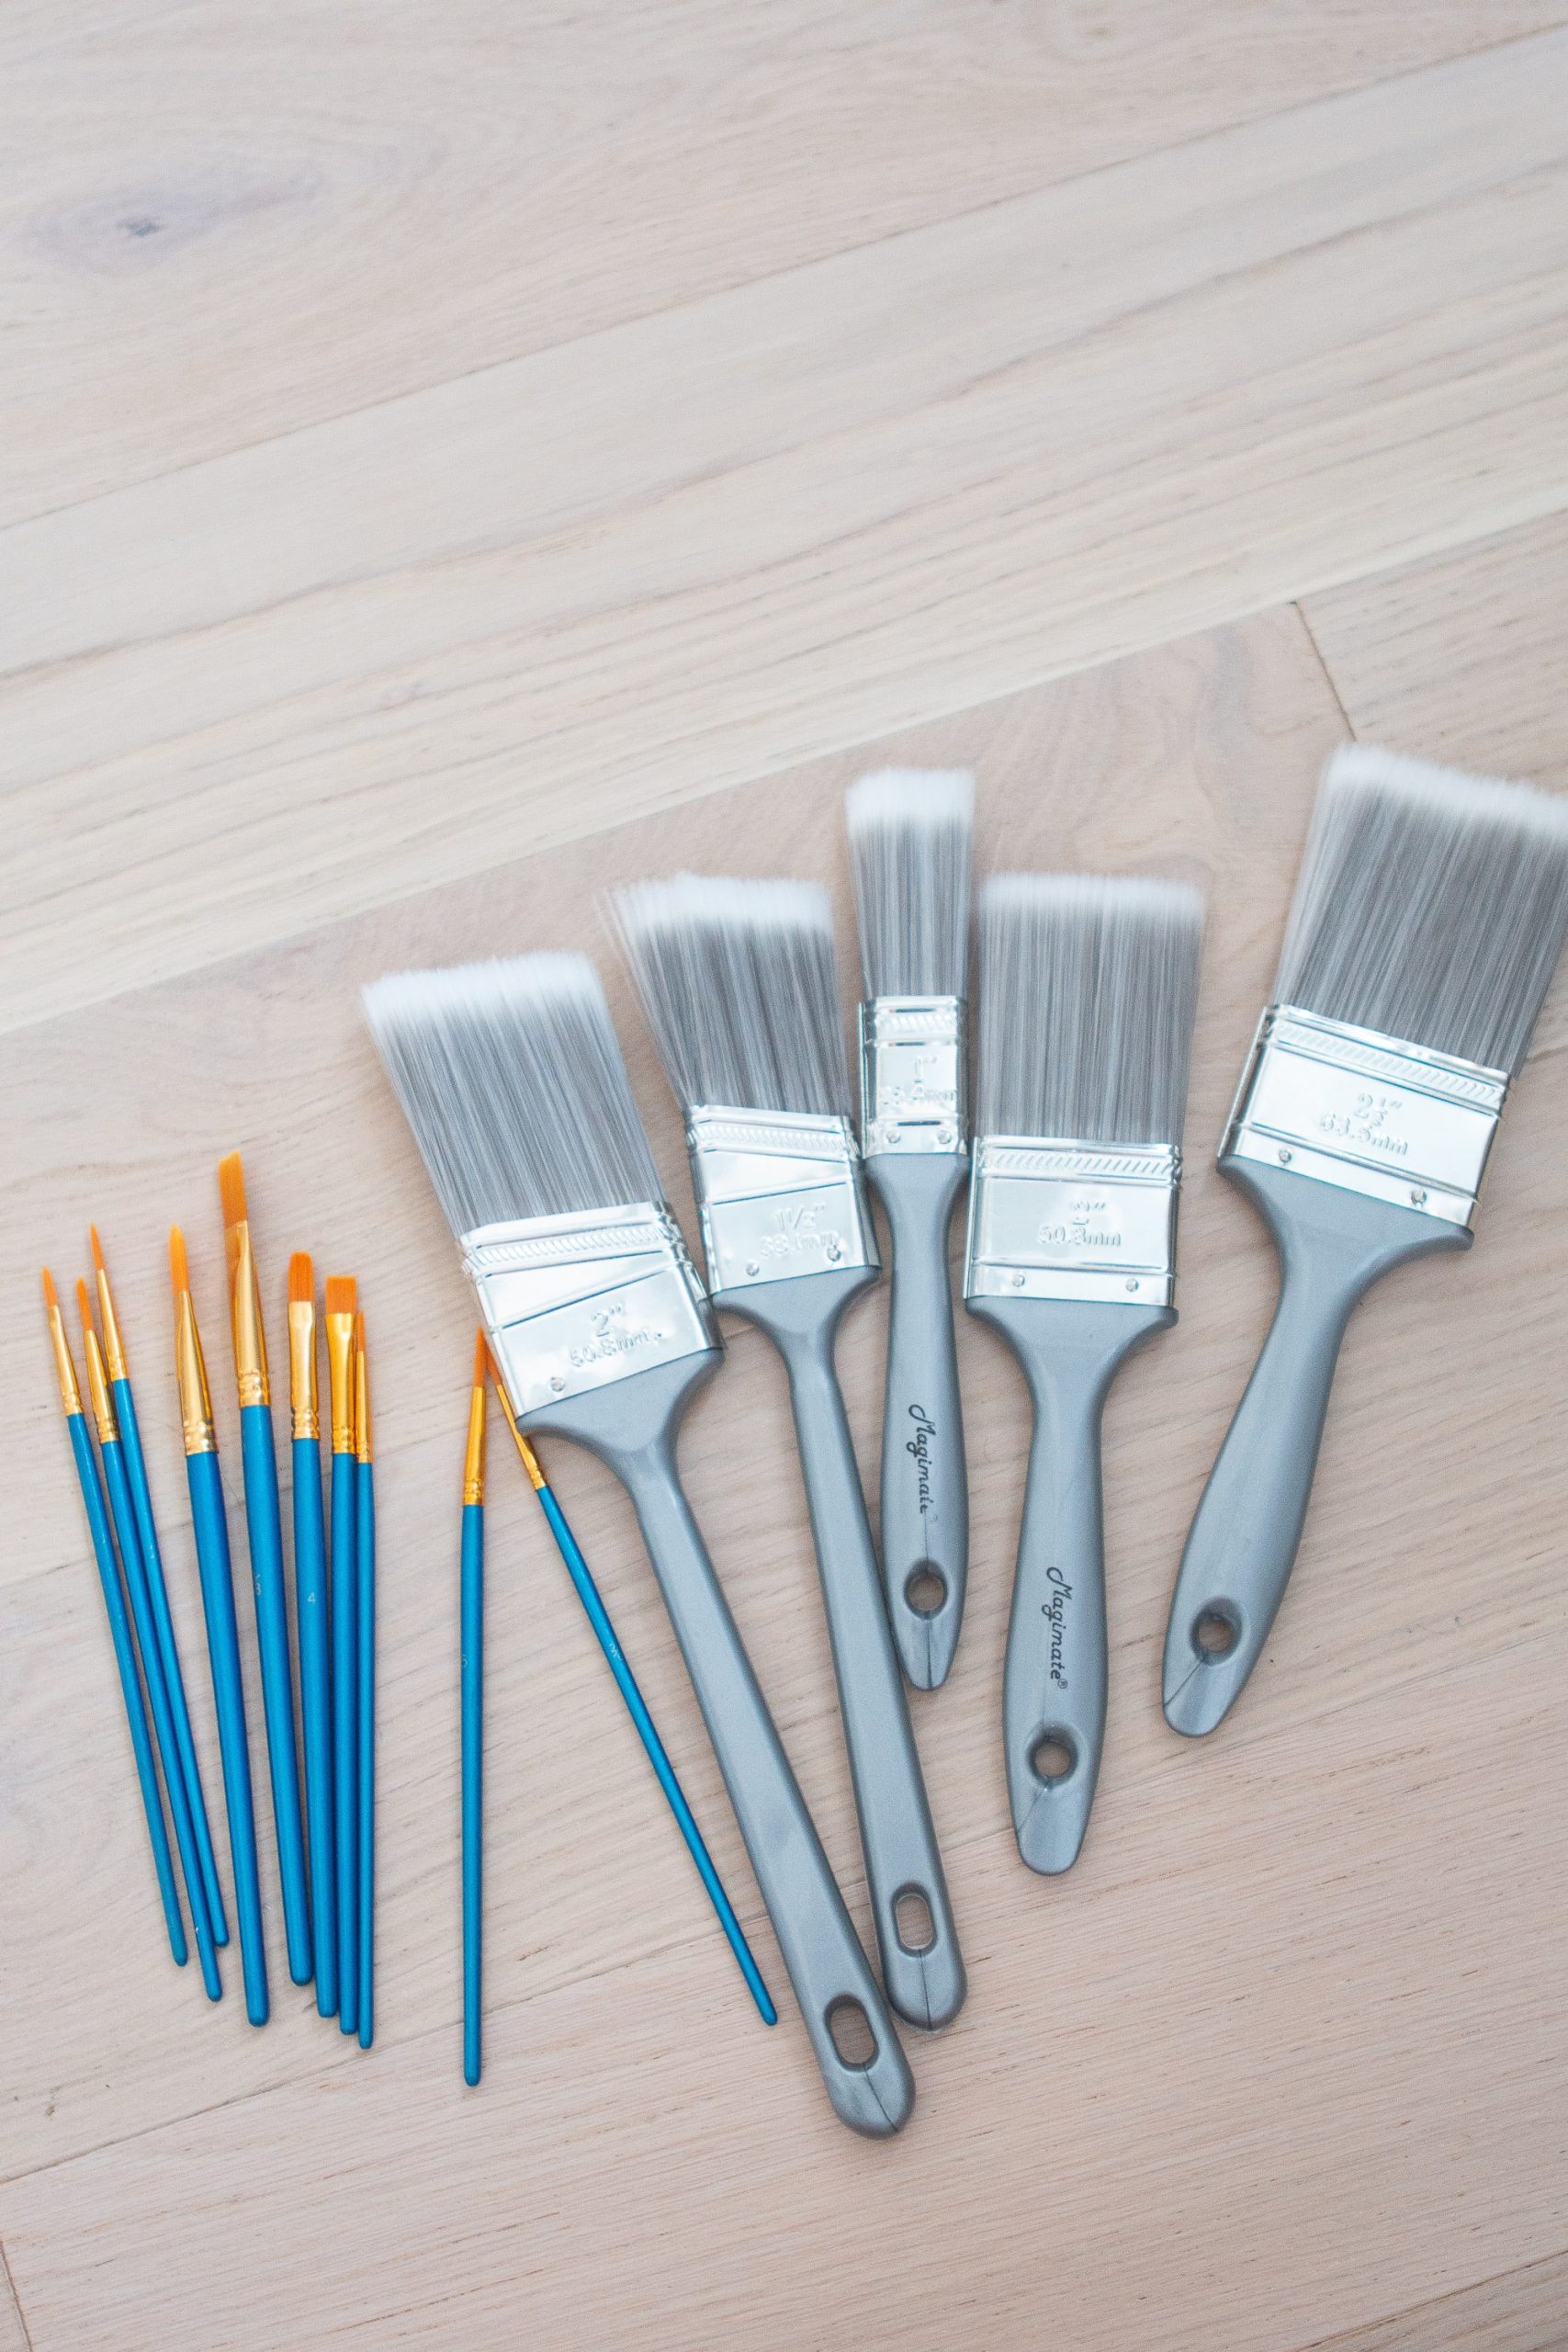 Craft supplies and brushes to create DIY abstract art